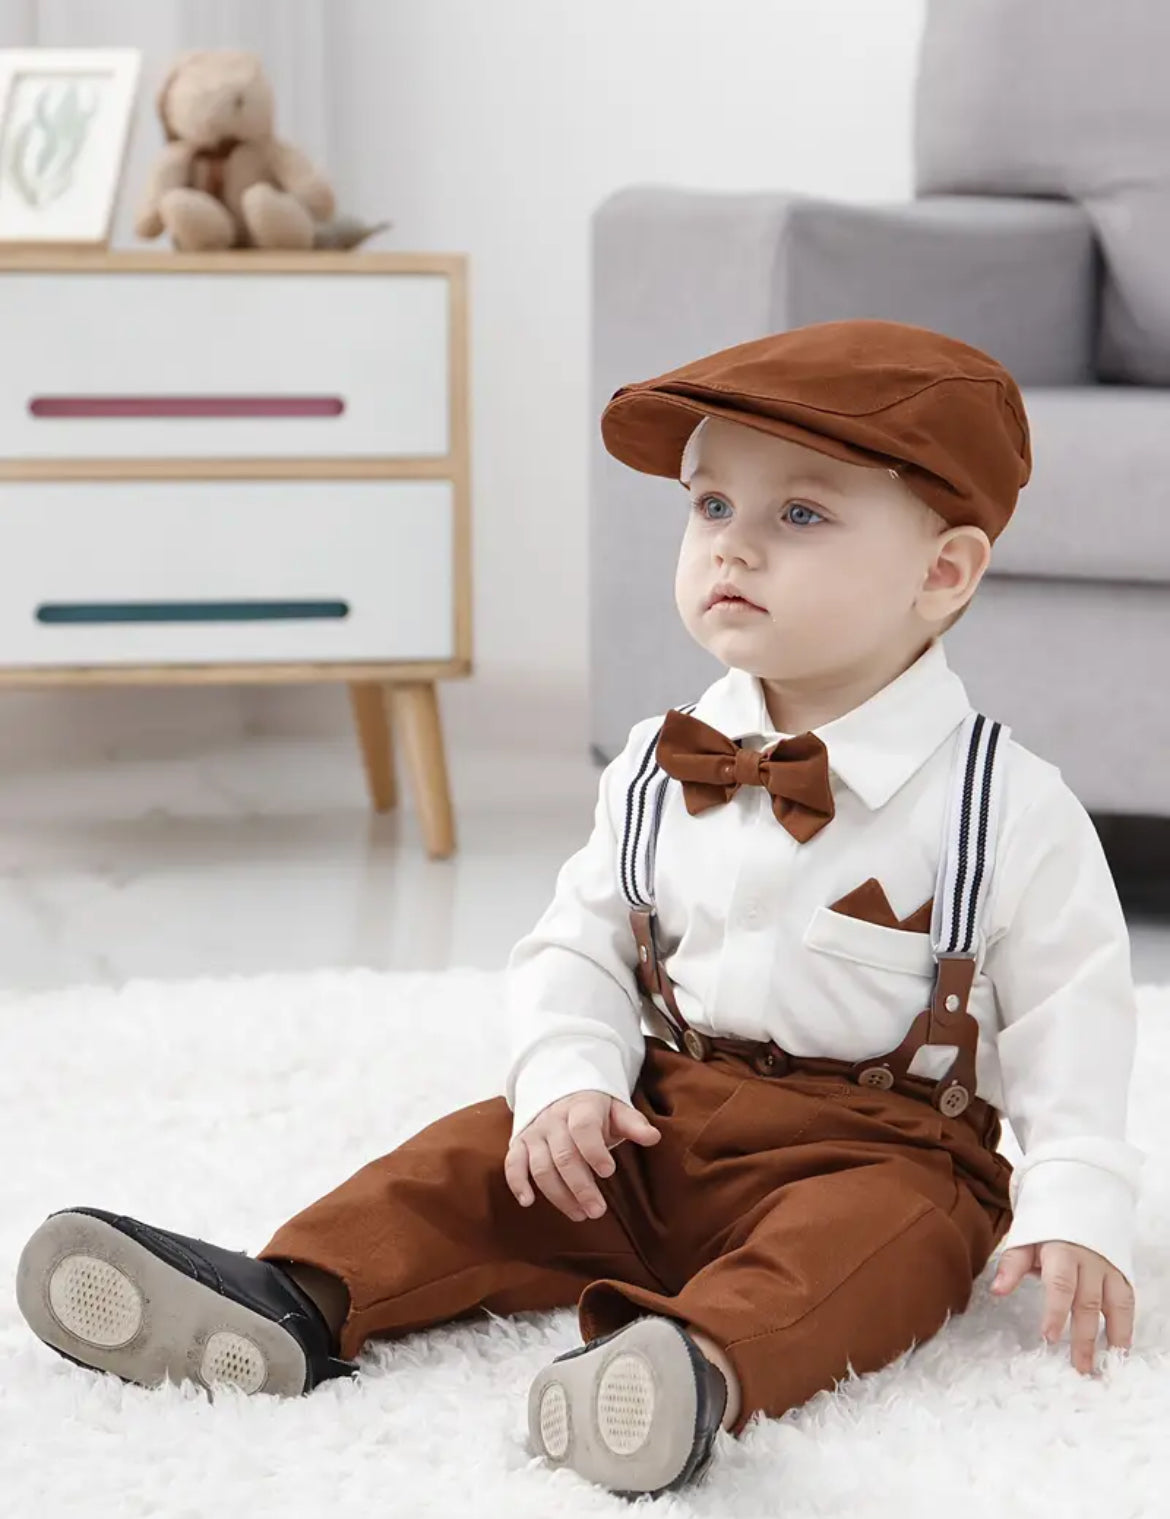 4pcs Baby Long-sleeved Gentleman Suit - Baby Triangle Jumpsuit, Beret, Suspenders, Bow Tie Set, 0-24 Months Soft And Comfortable Toddler Dress